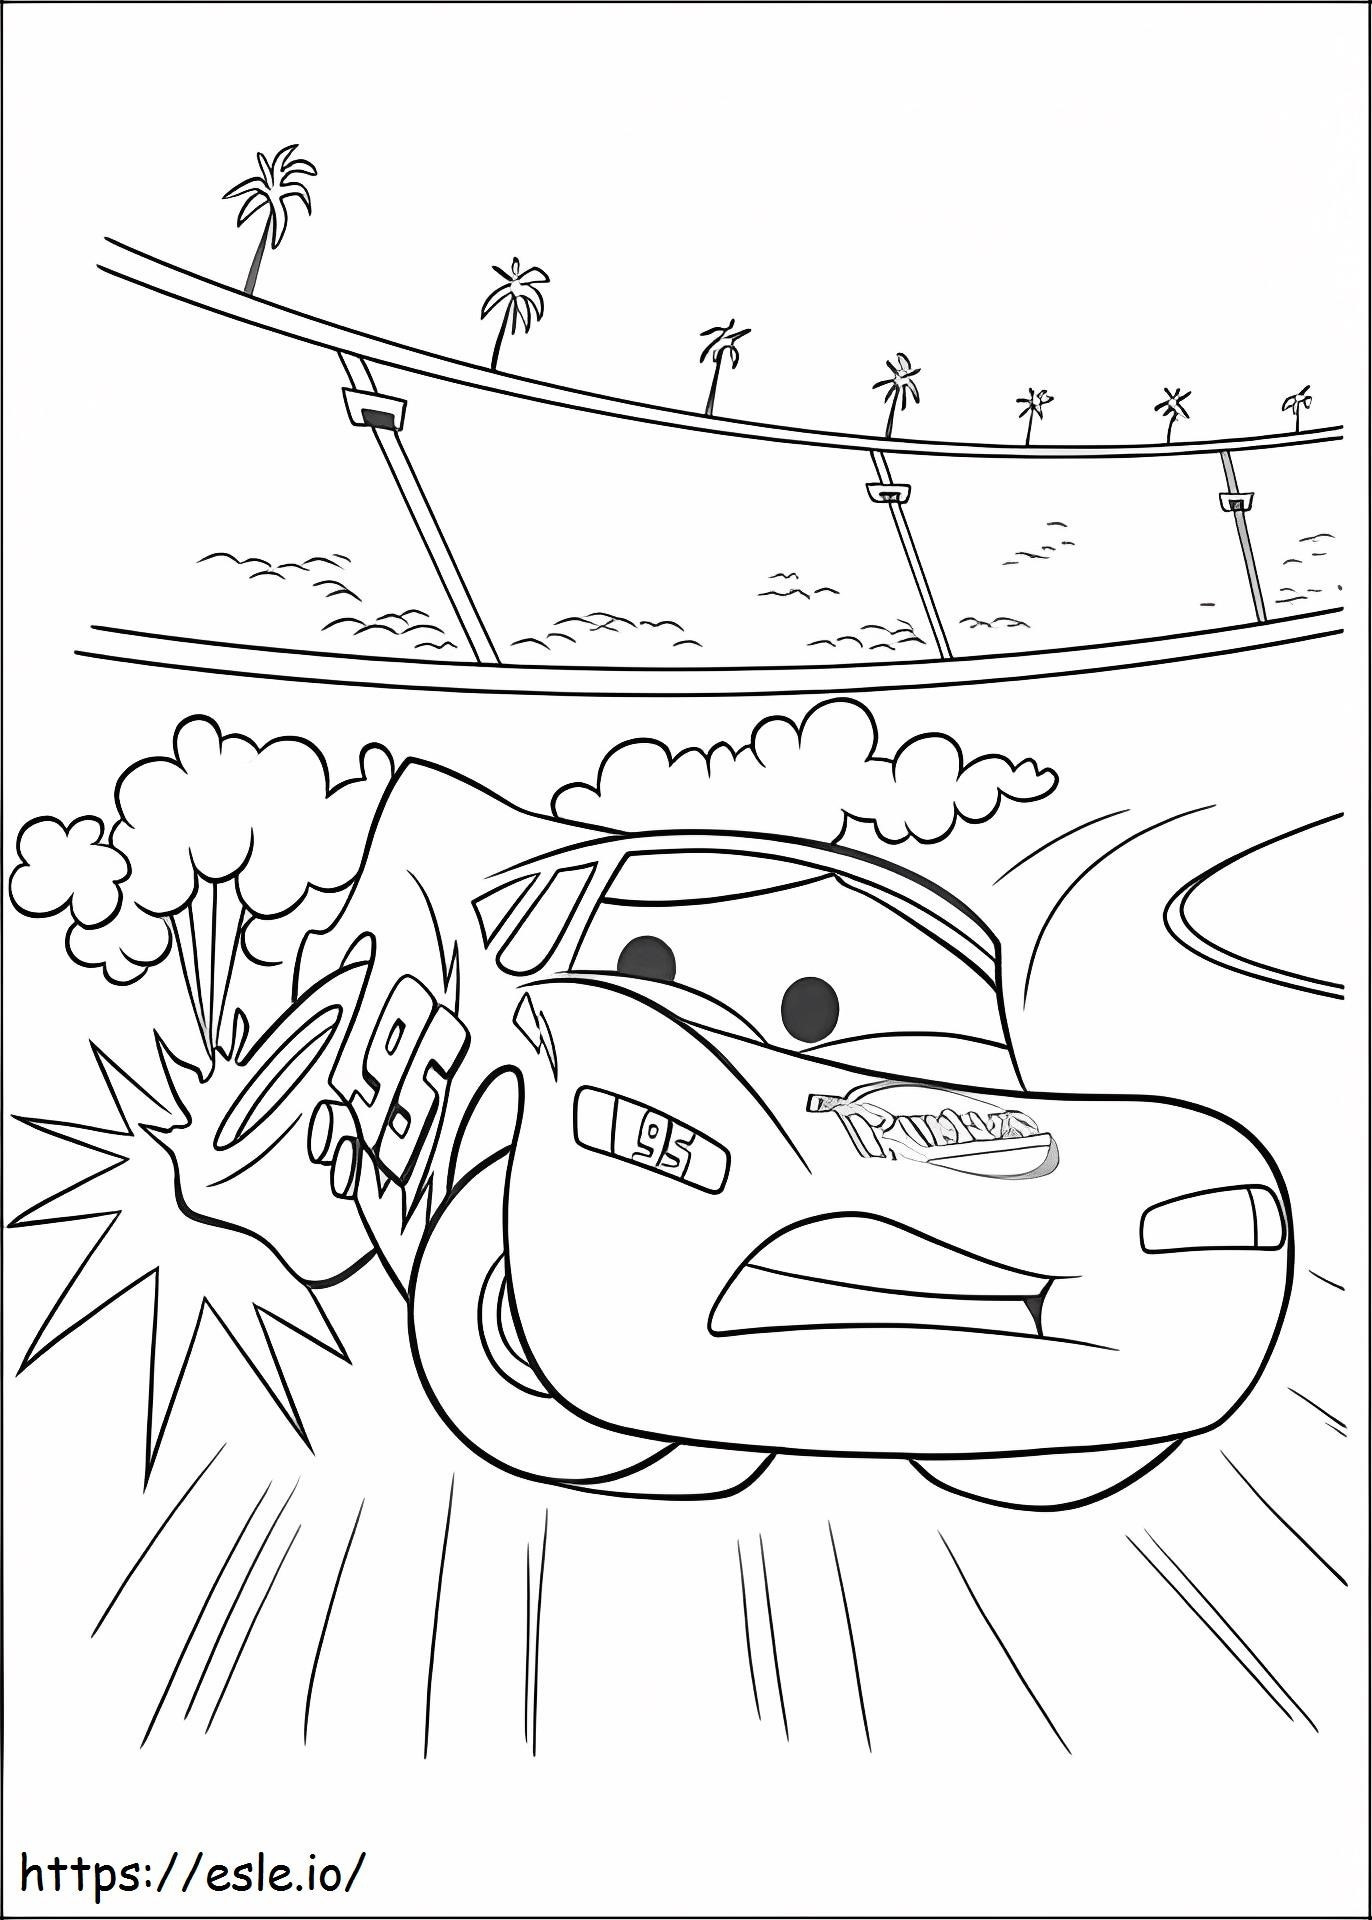 1532921417 Mcqueen In Trouble A4 coloring page